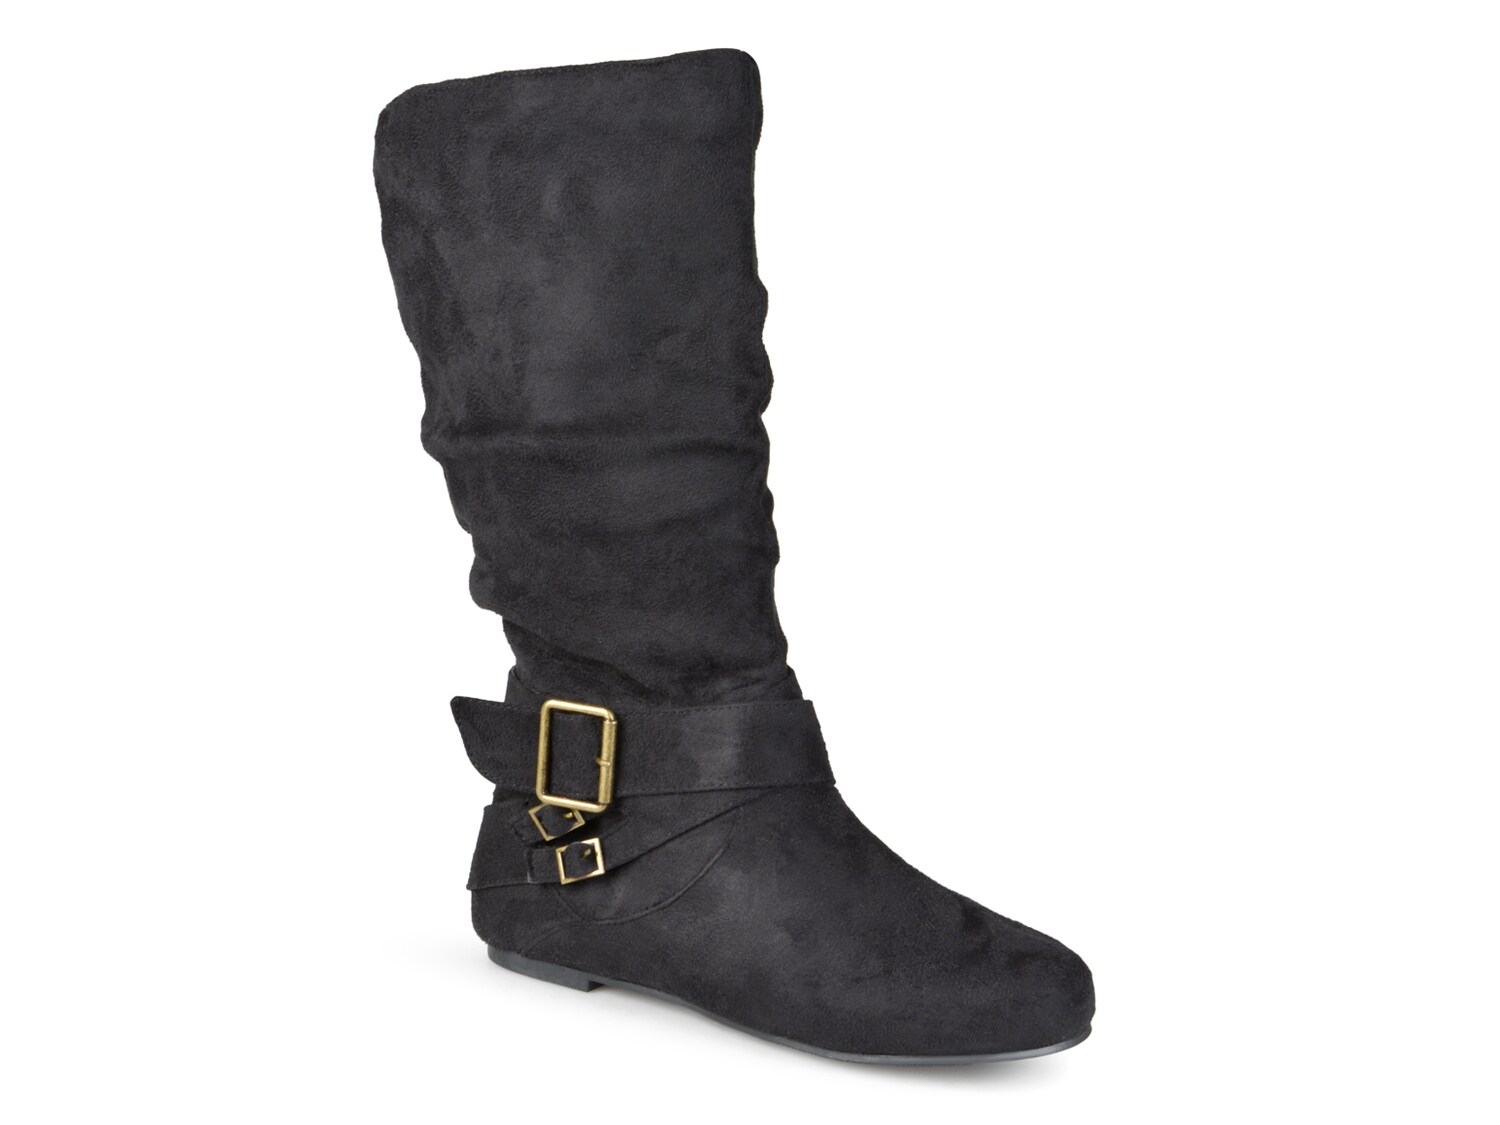 Journee Collection Shelley-6 Wide Calf Boot - Free Shipping | DSW